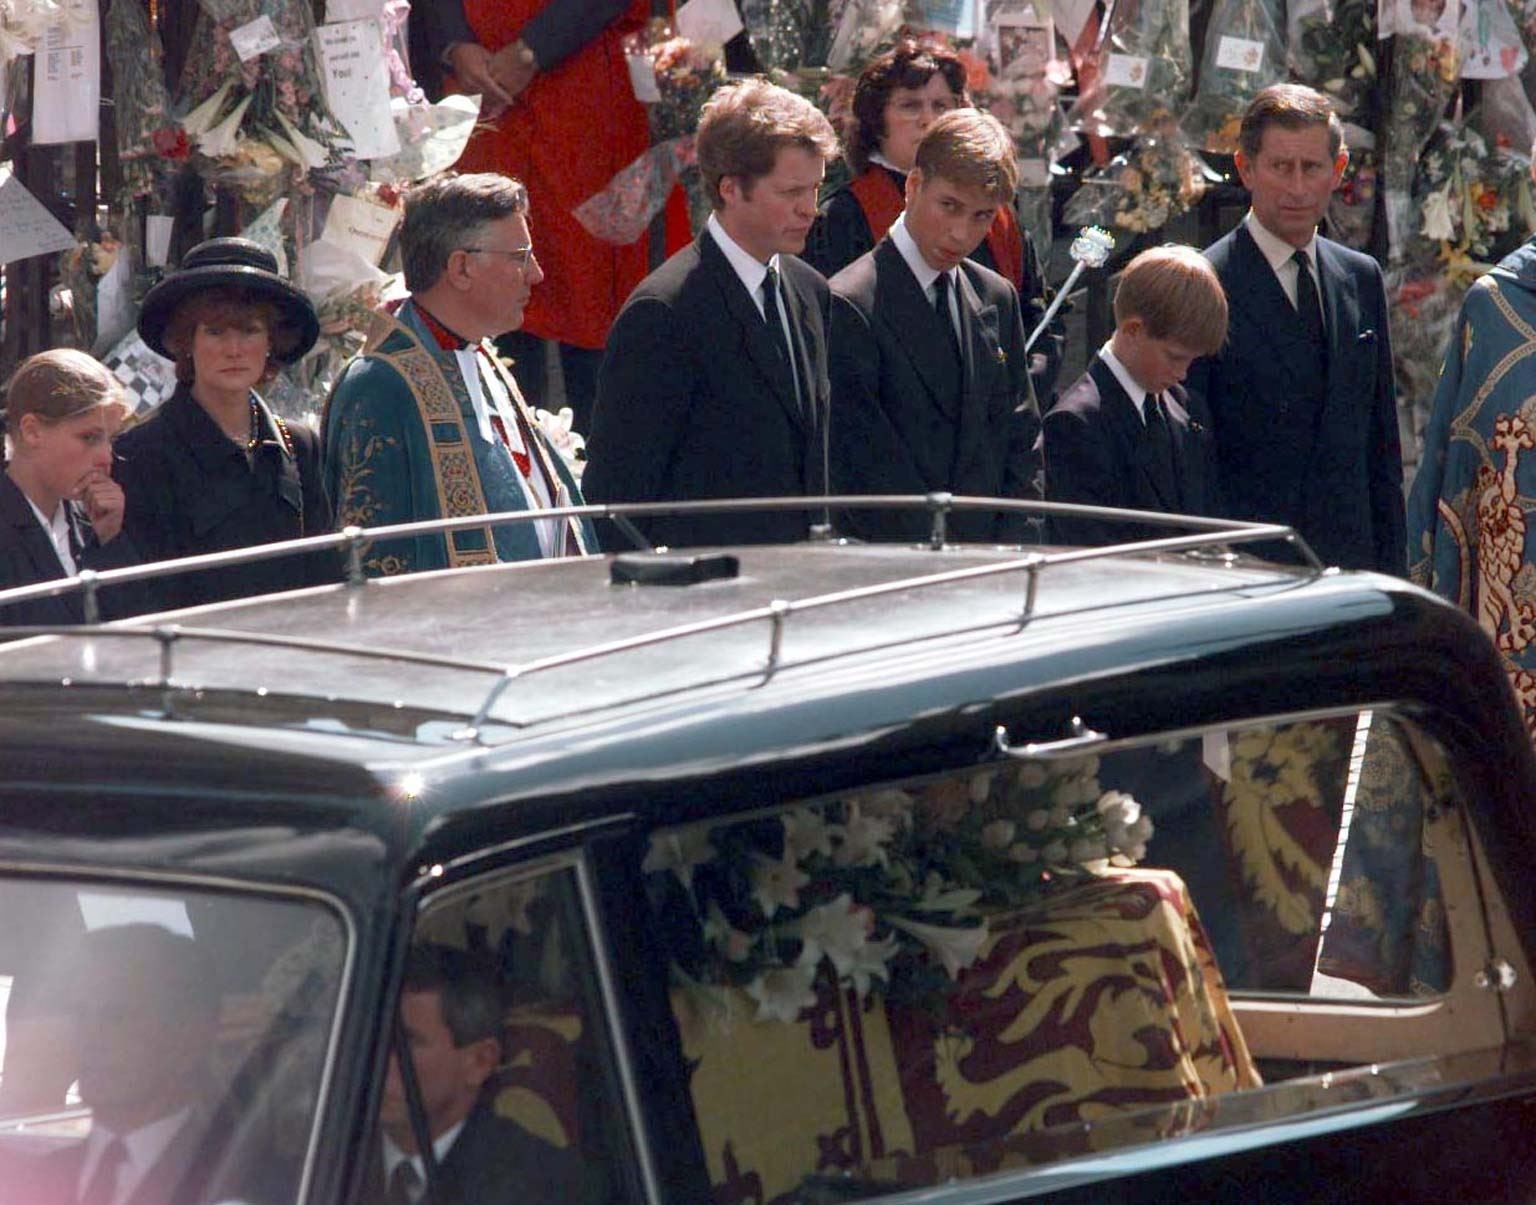 William with his uncle, brother and father at Diana’s funeral in 1997 (Sean Dempsey/PA)